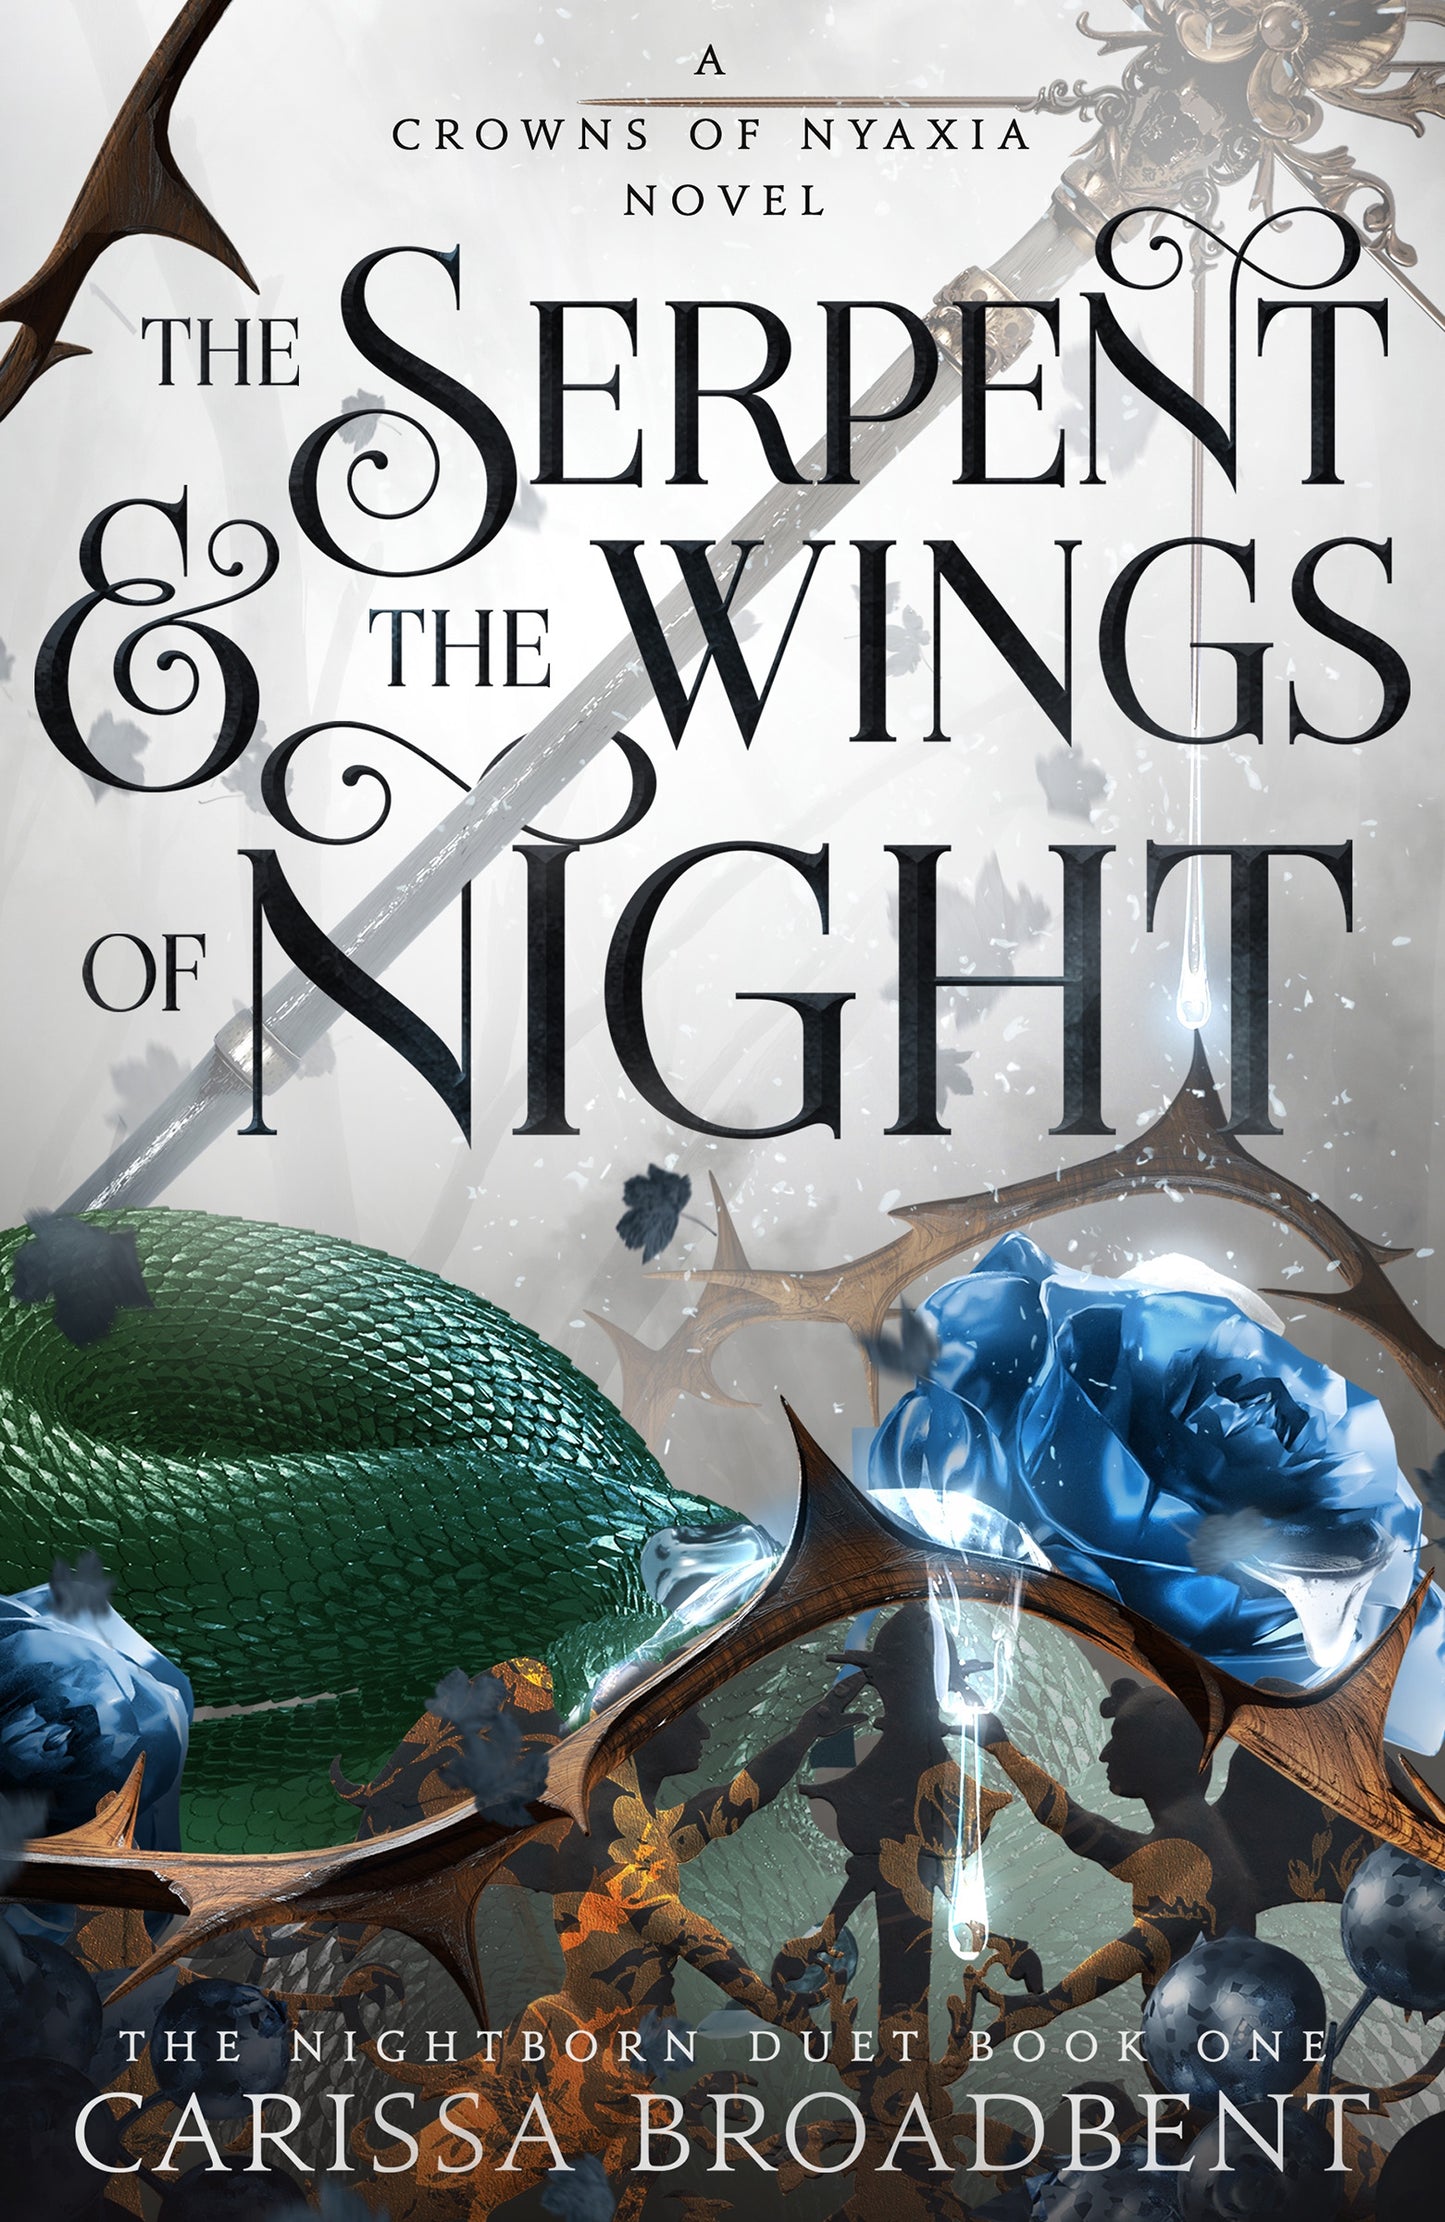 The Serpent and the Wings of Night: The Nightborn Duet, Book 1 (Crowns of Nyaxia #1)